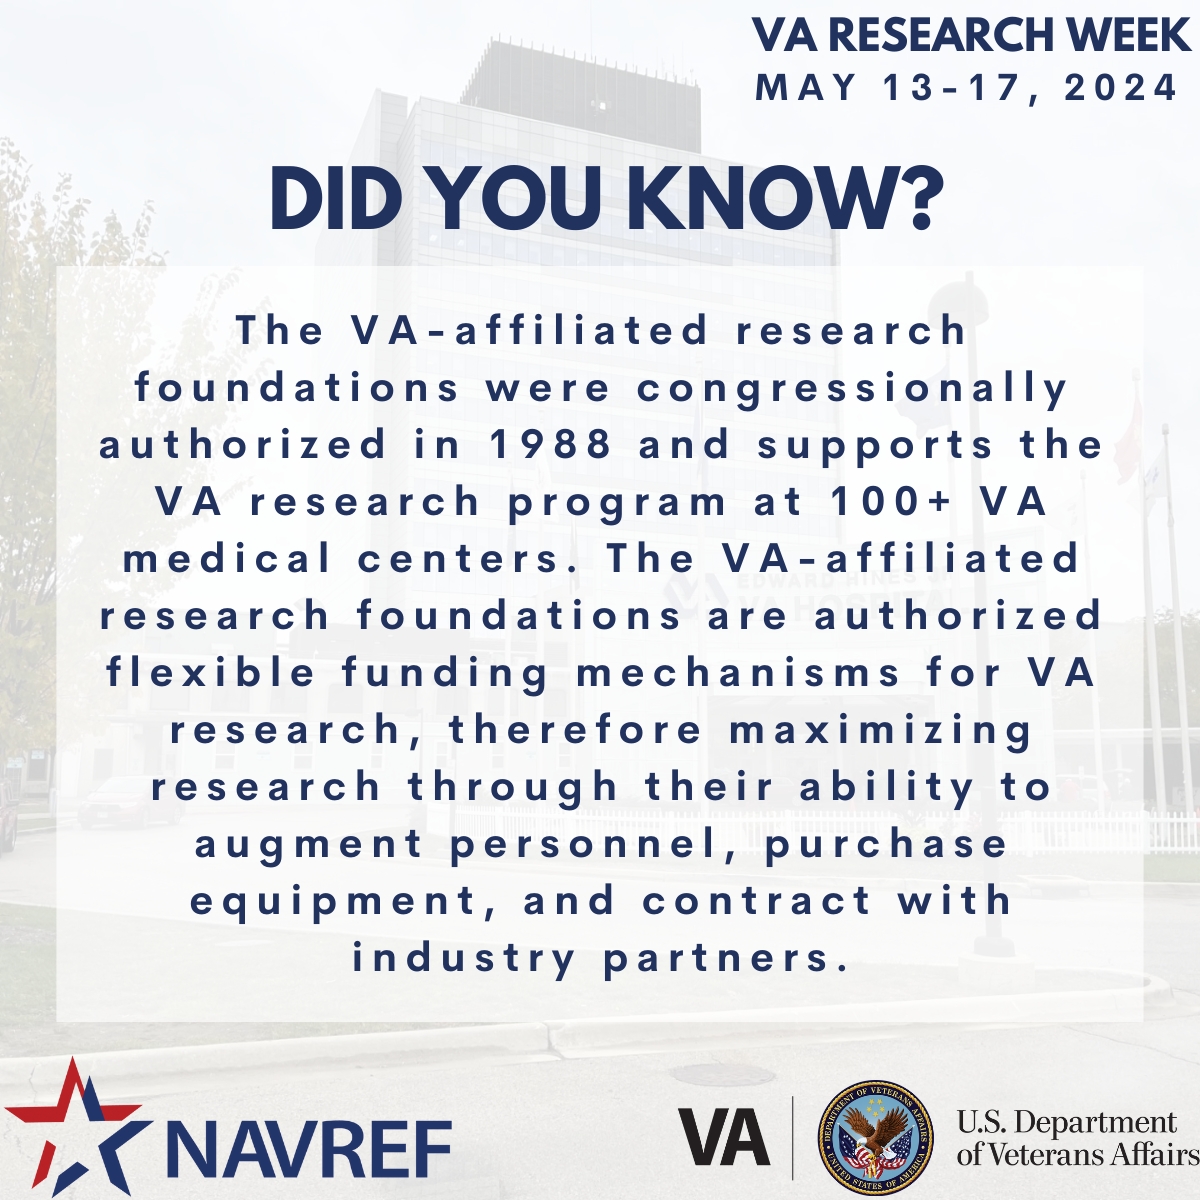 Happy Day 1 of #VAResearchWeek! #DidYouKnow? #NAVREF's 75+ VA-affiliated #research & #education foundations support @VAresearch across 100+ medical centers since 1988. @DeptVetAffairs